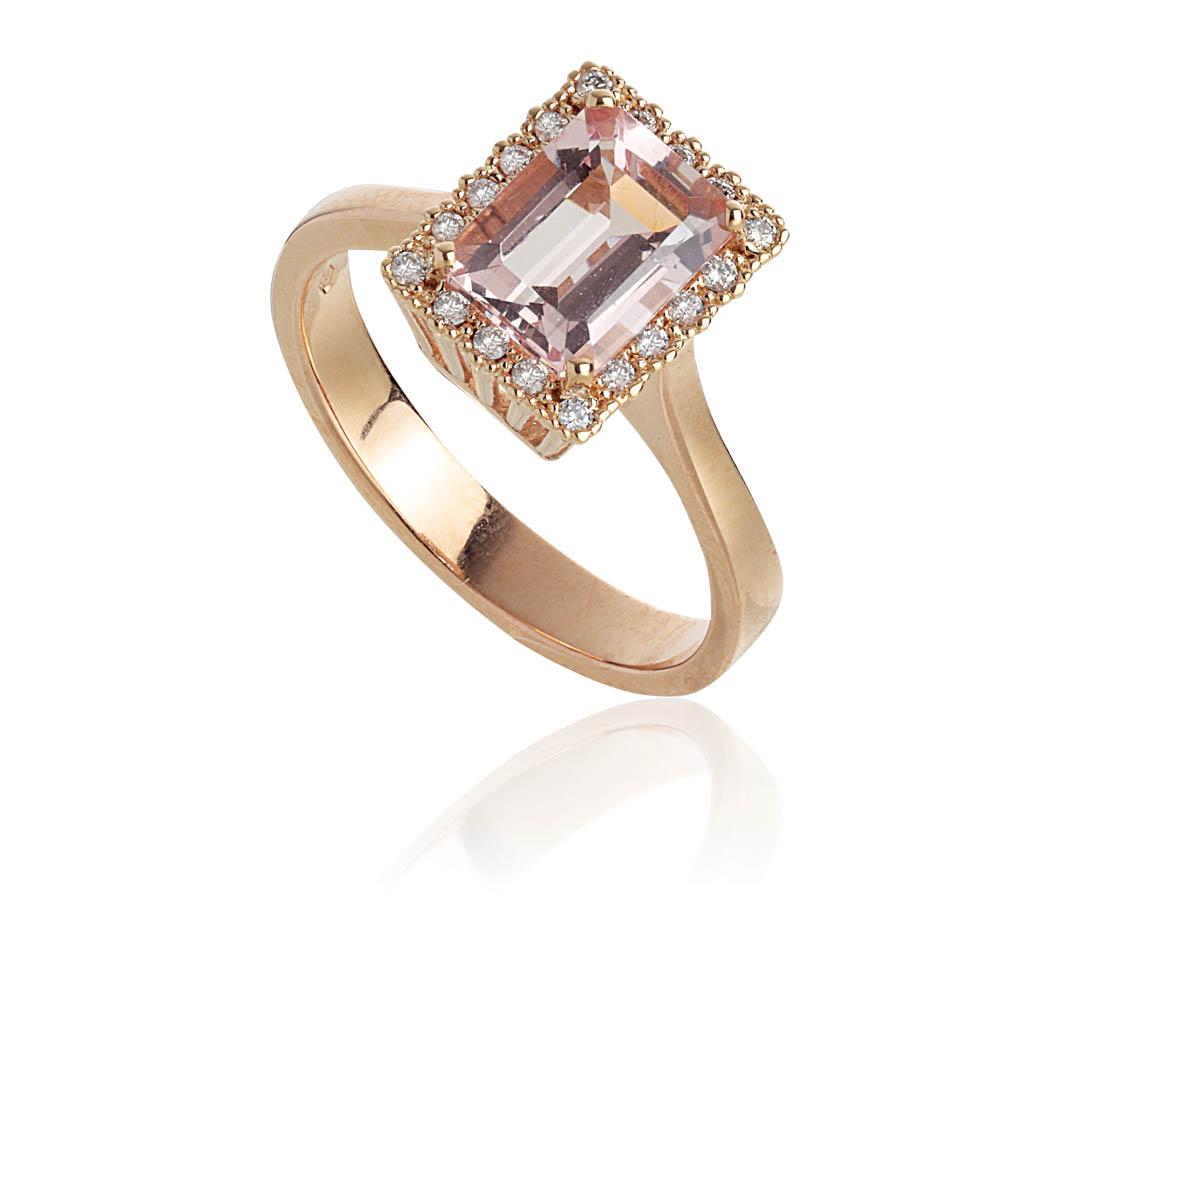 Gold ring with Morganite and Diamonds - AD523/MO-LR